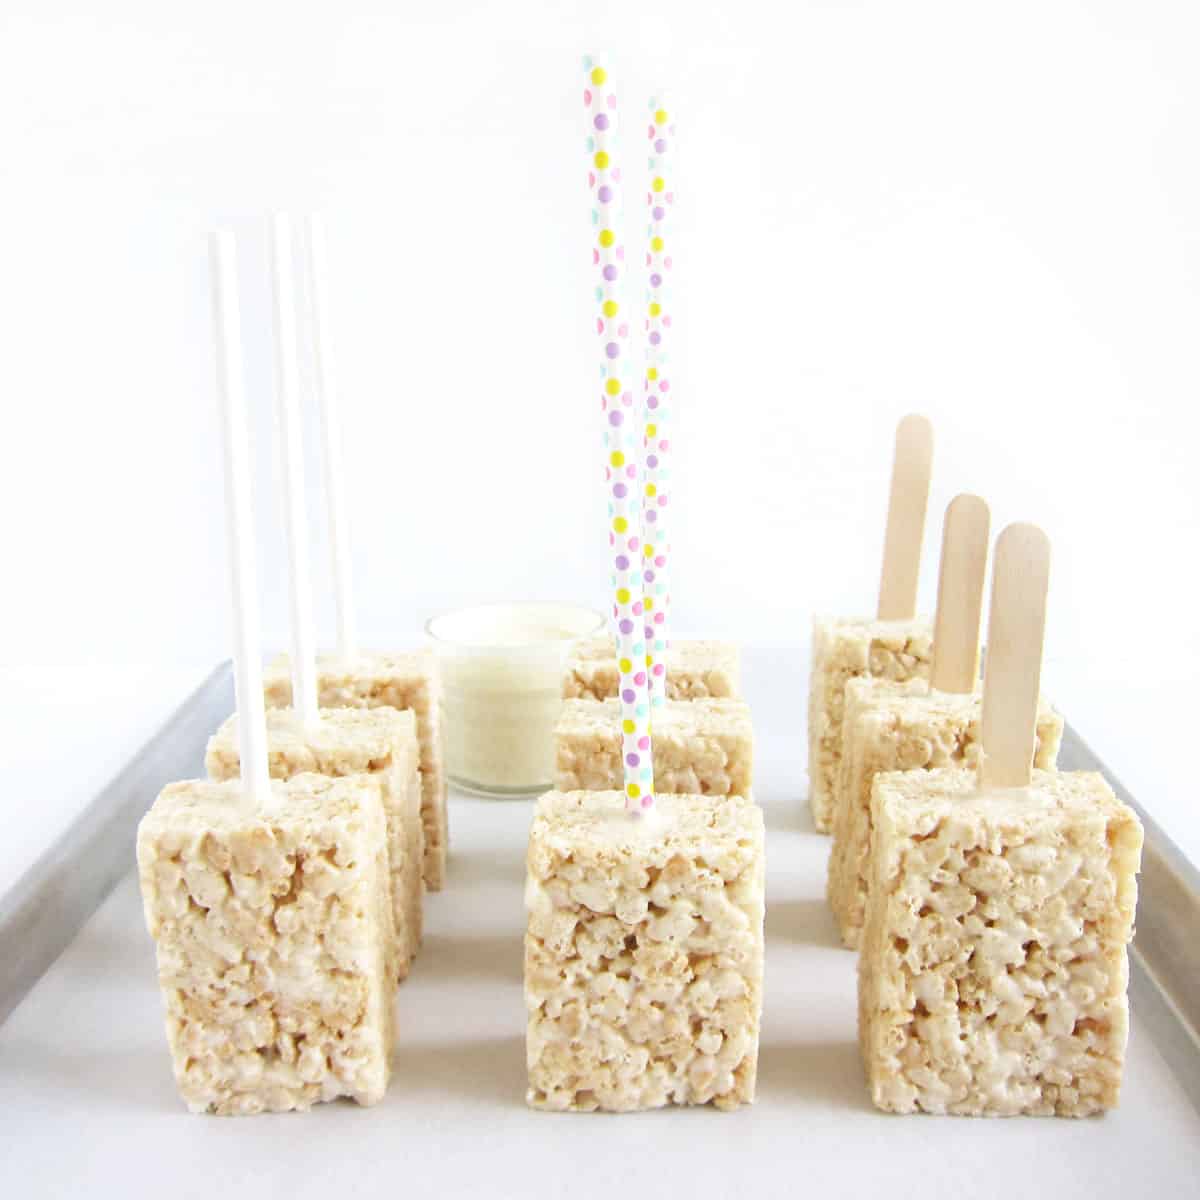 A variety of Rice Krispie Treat pop with lollipop sticks, paper straws, and popsicle sticks on a baking tray.